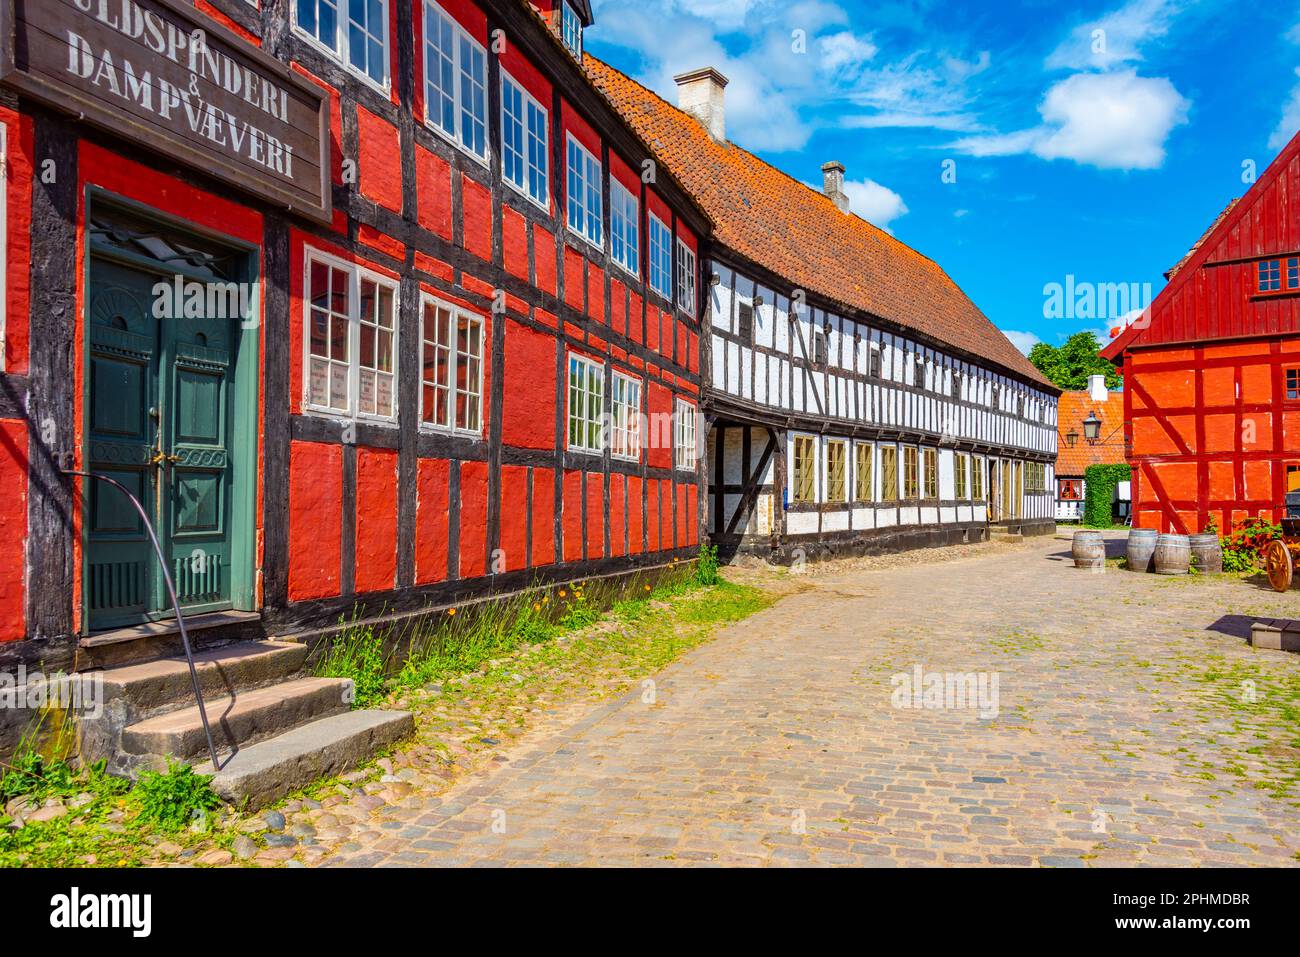 Colorful houses in Den Gamle By open-air museum in Aarhus, Denmark. Stock Photo